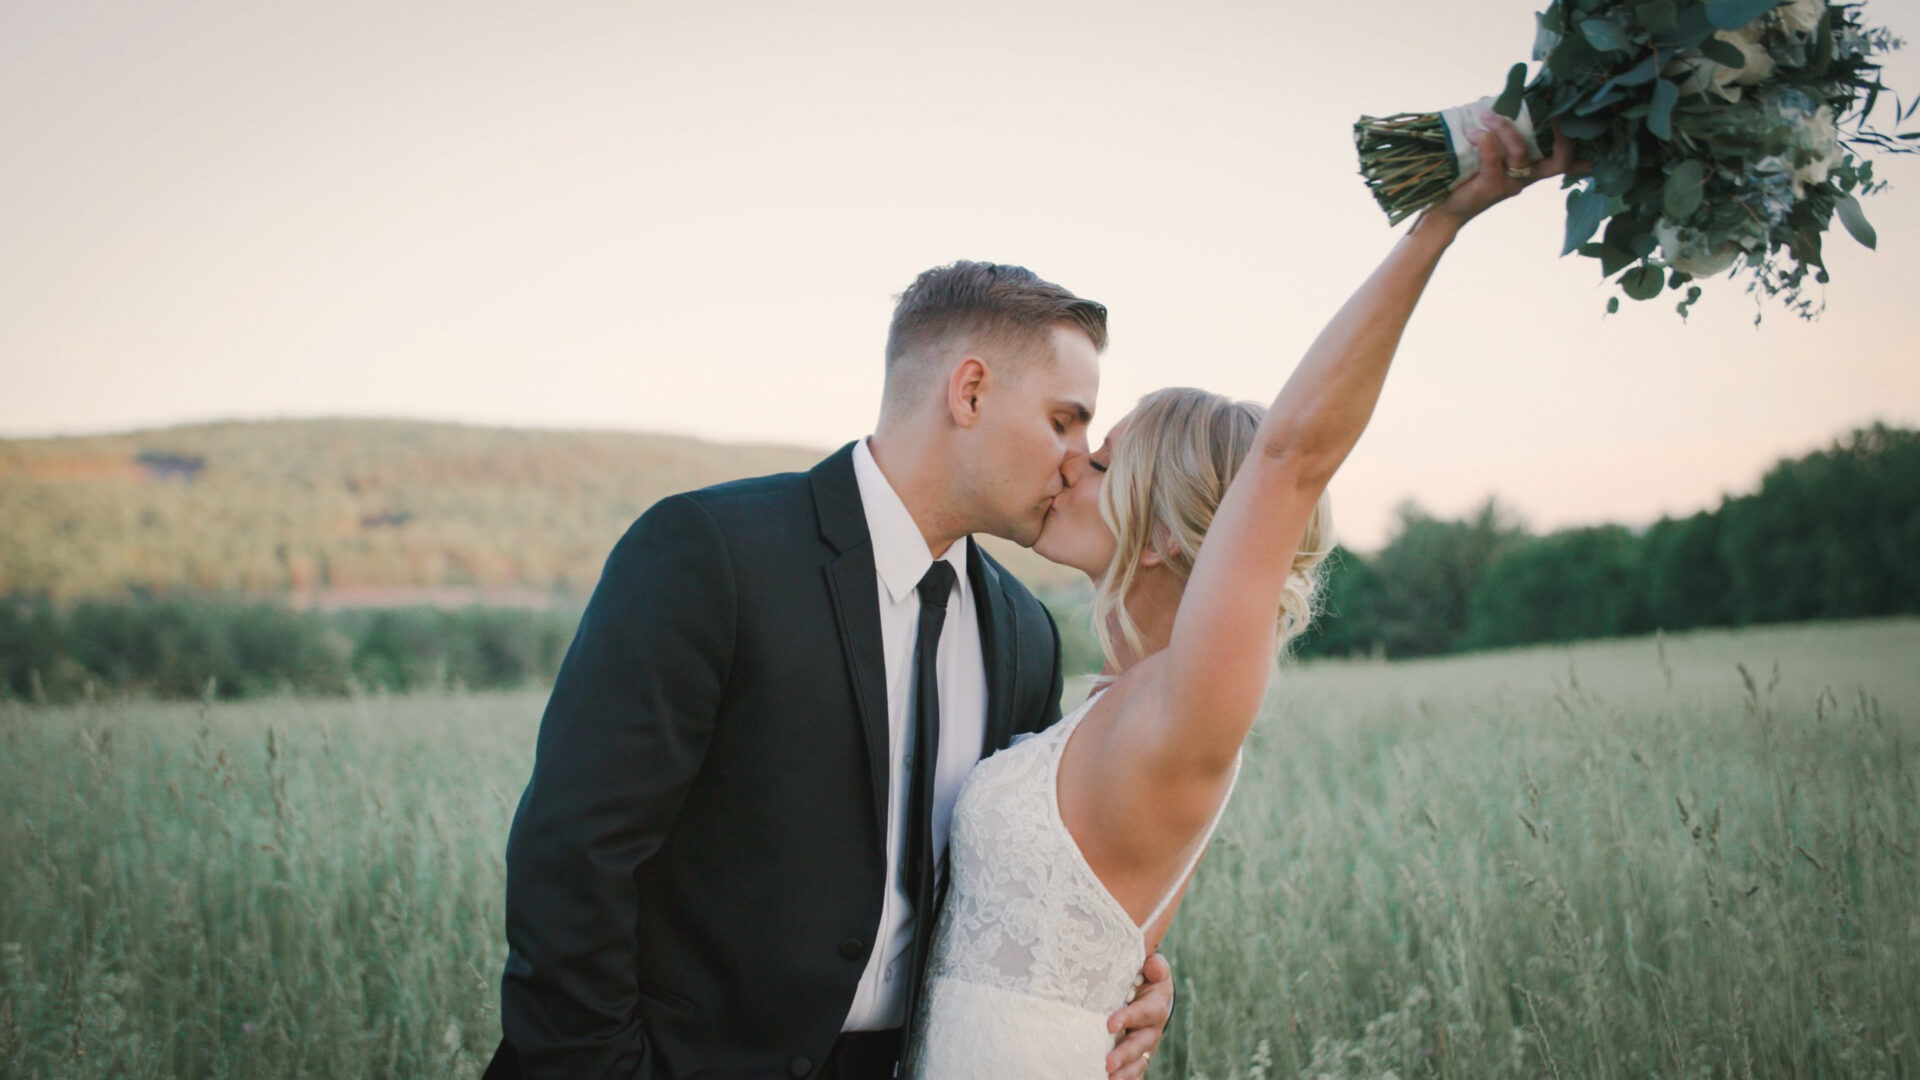 Wedding couple kissing in field for video. Bride holding bouquet over her head